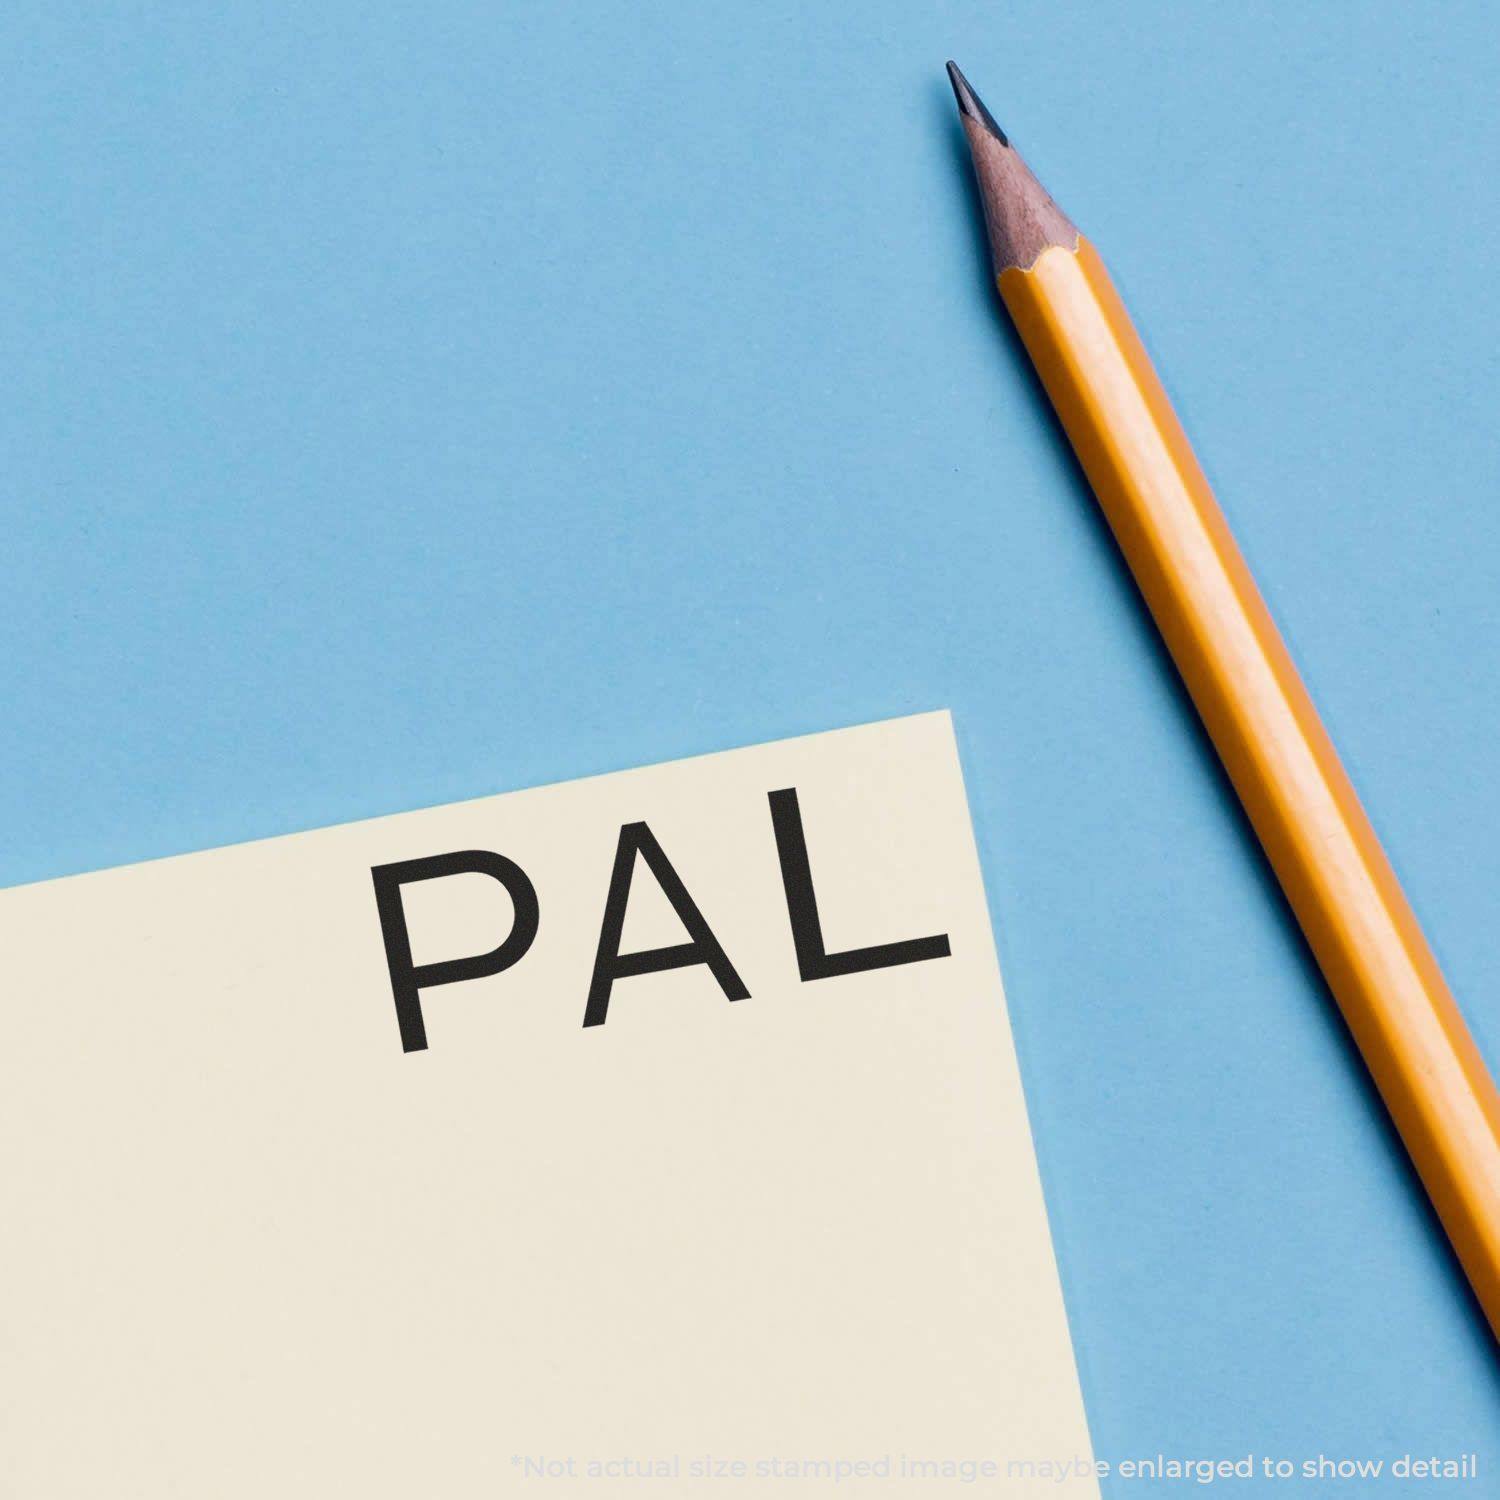 A stock office rubber stamp with a stamped image showing how the text "PAL" is displayed after stamping.